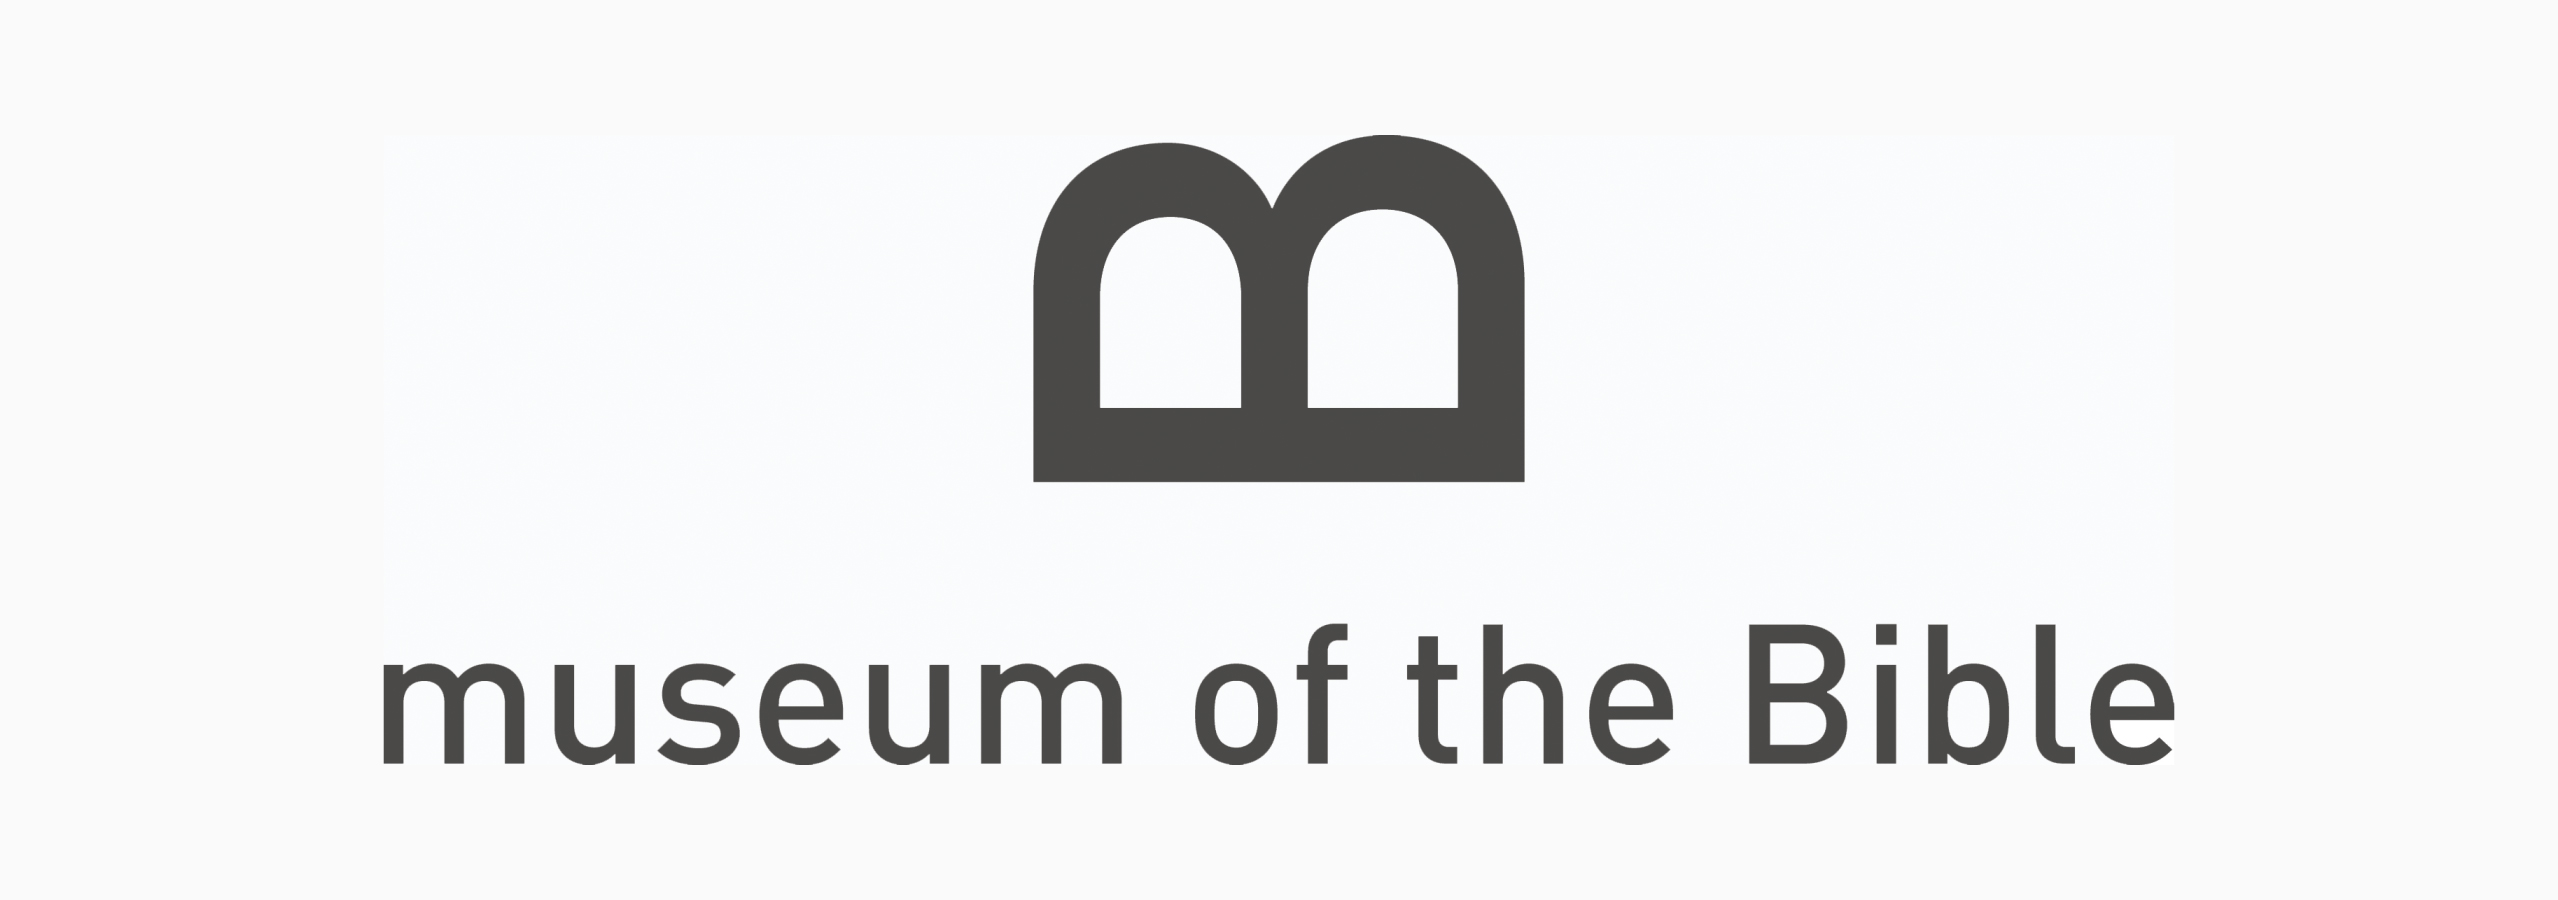 Museum Of The Bible | Abraham Productions